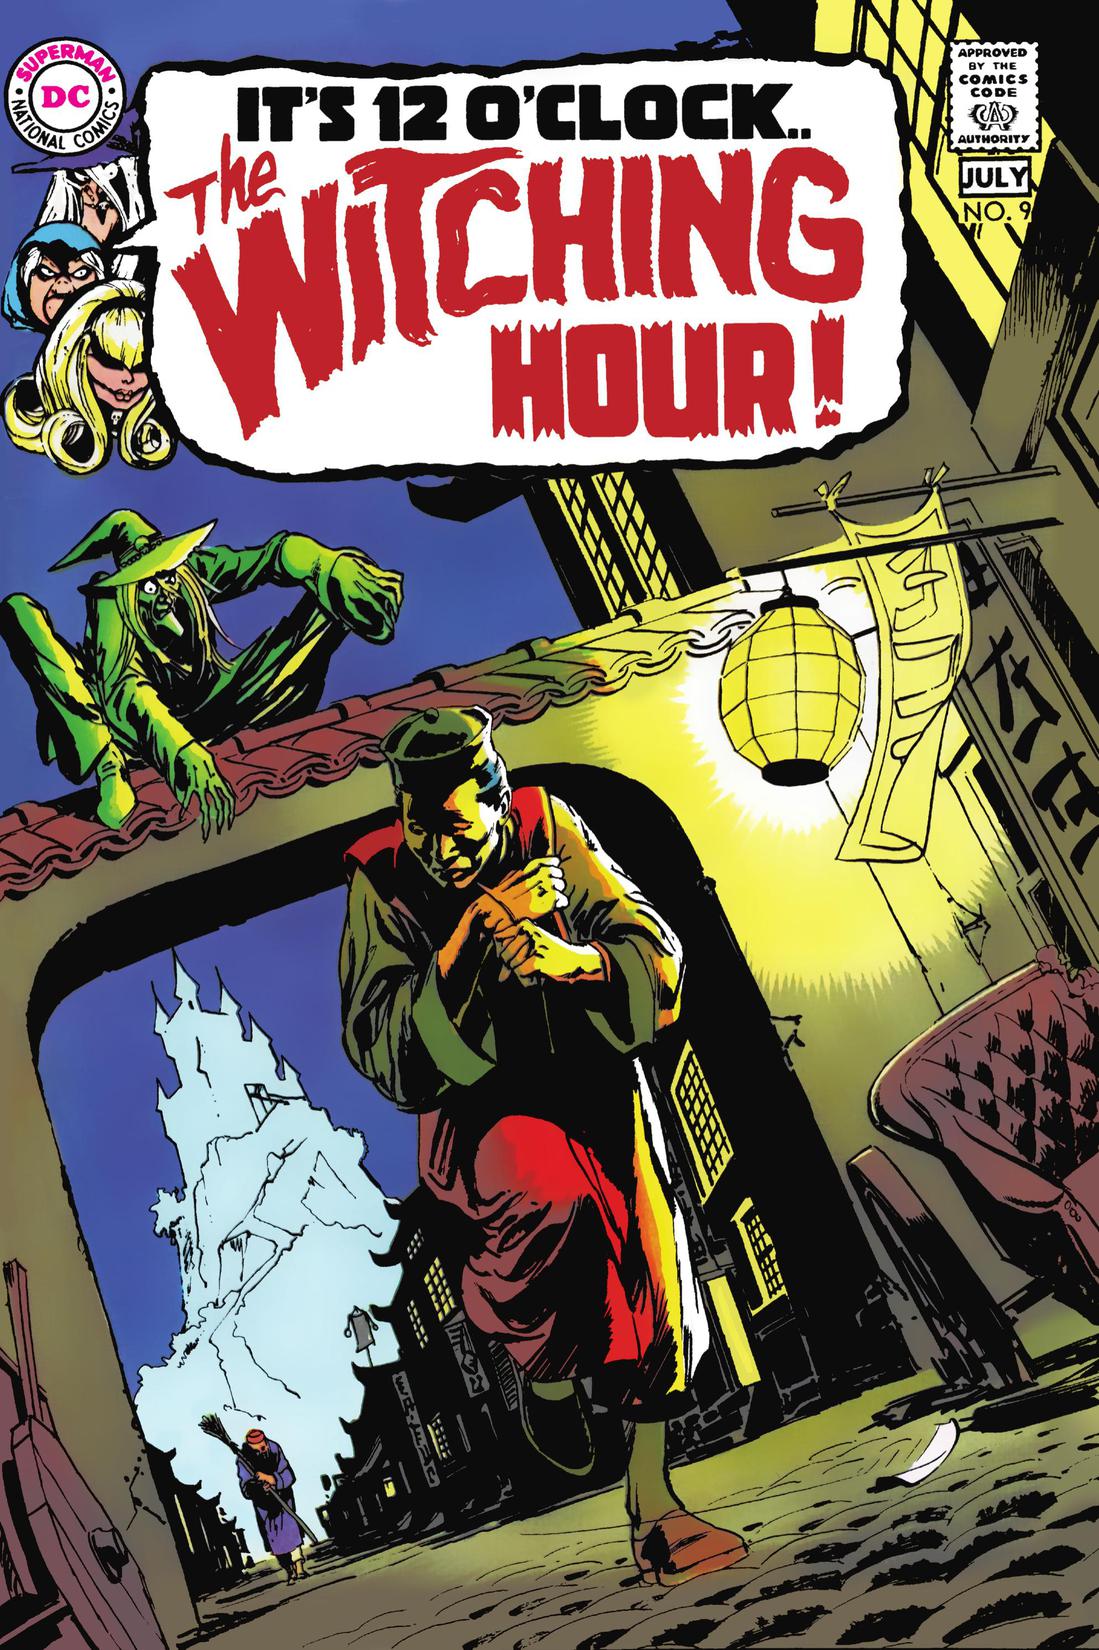 The Witching Hour #9 preview images